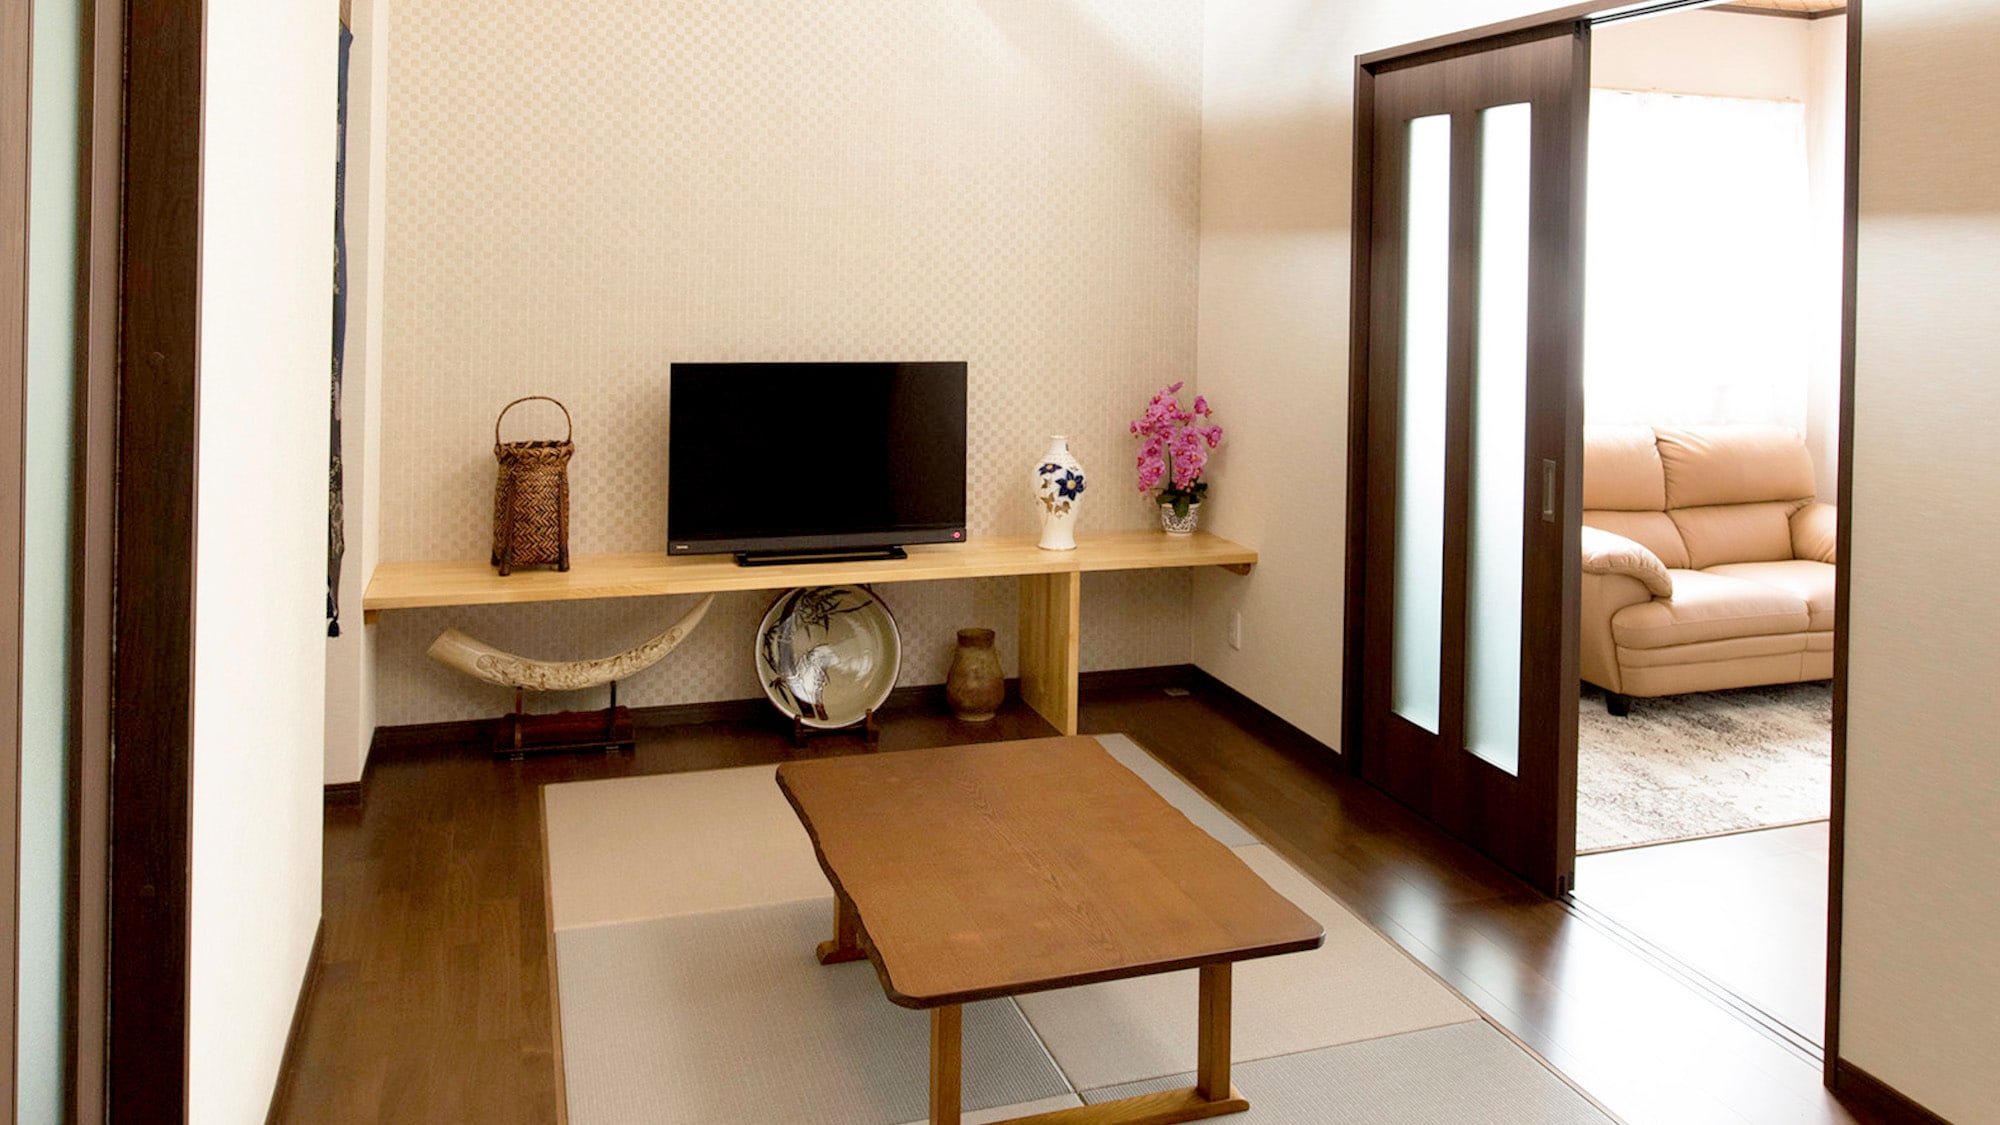 ・[100% free-flowing natural hot spring with rock open-air bath] Annex/Japanese modern guest room